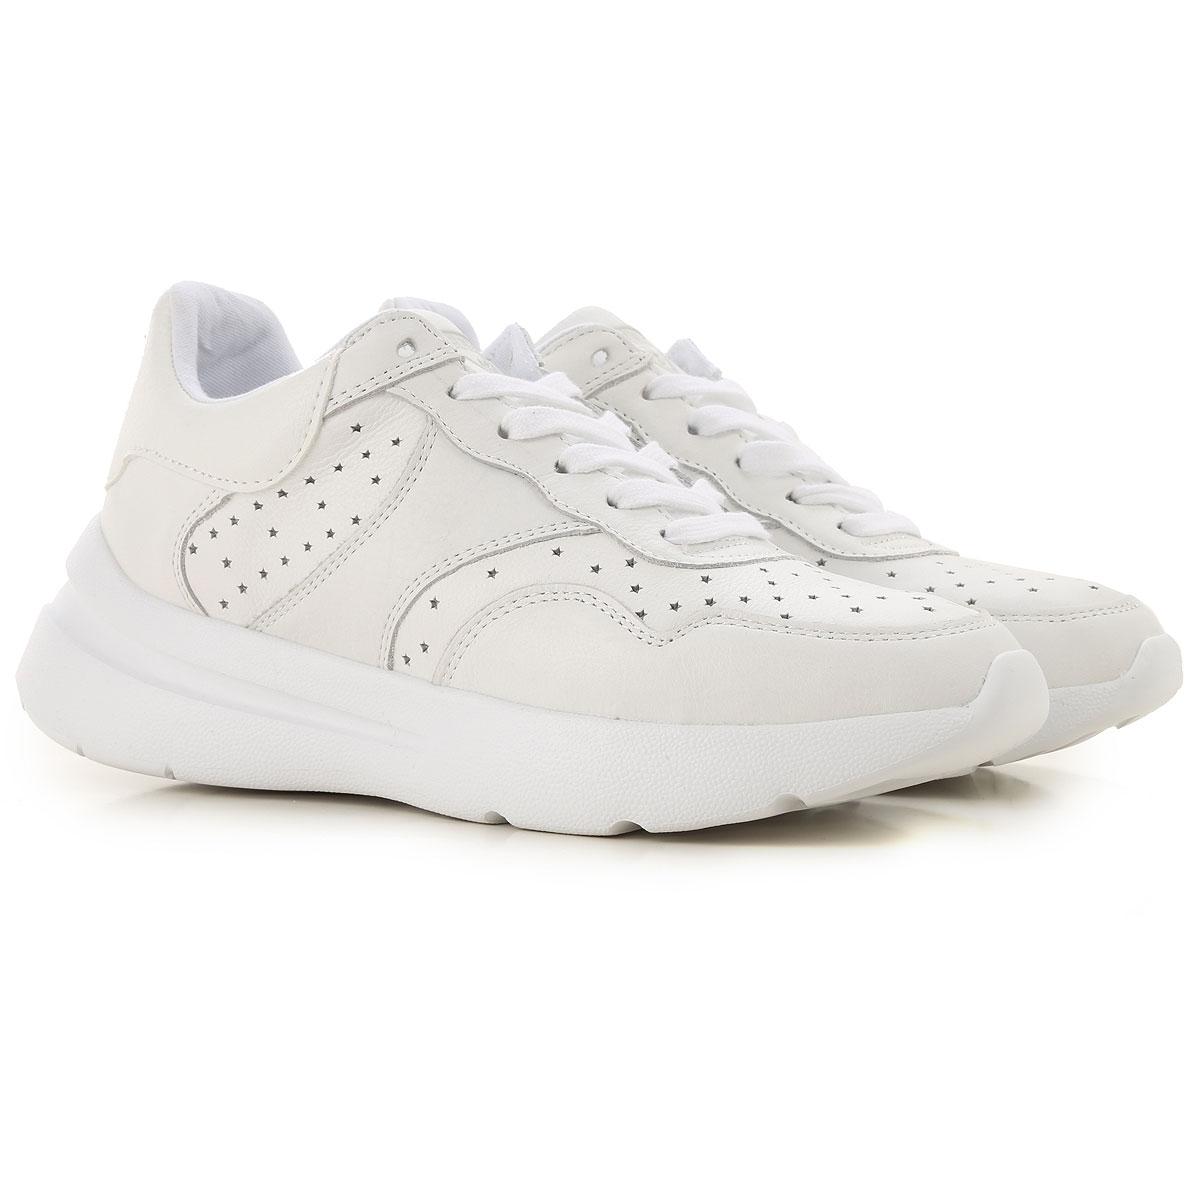 Guess Sneakers For Women On Sale in White - Lyst